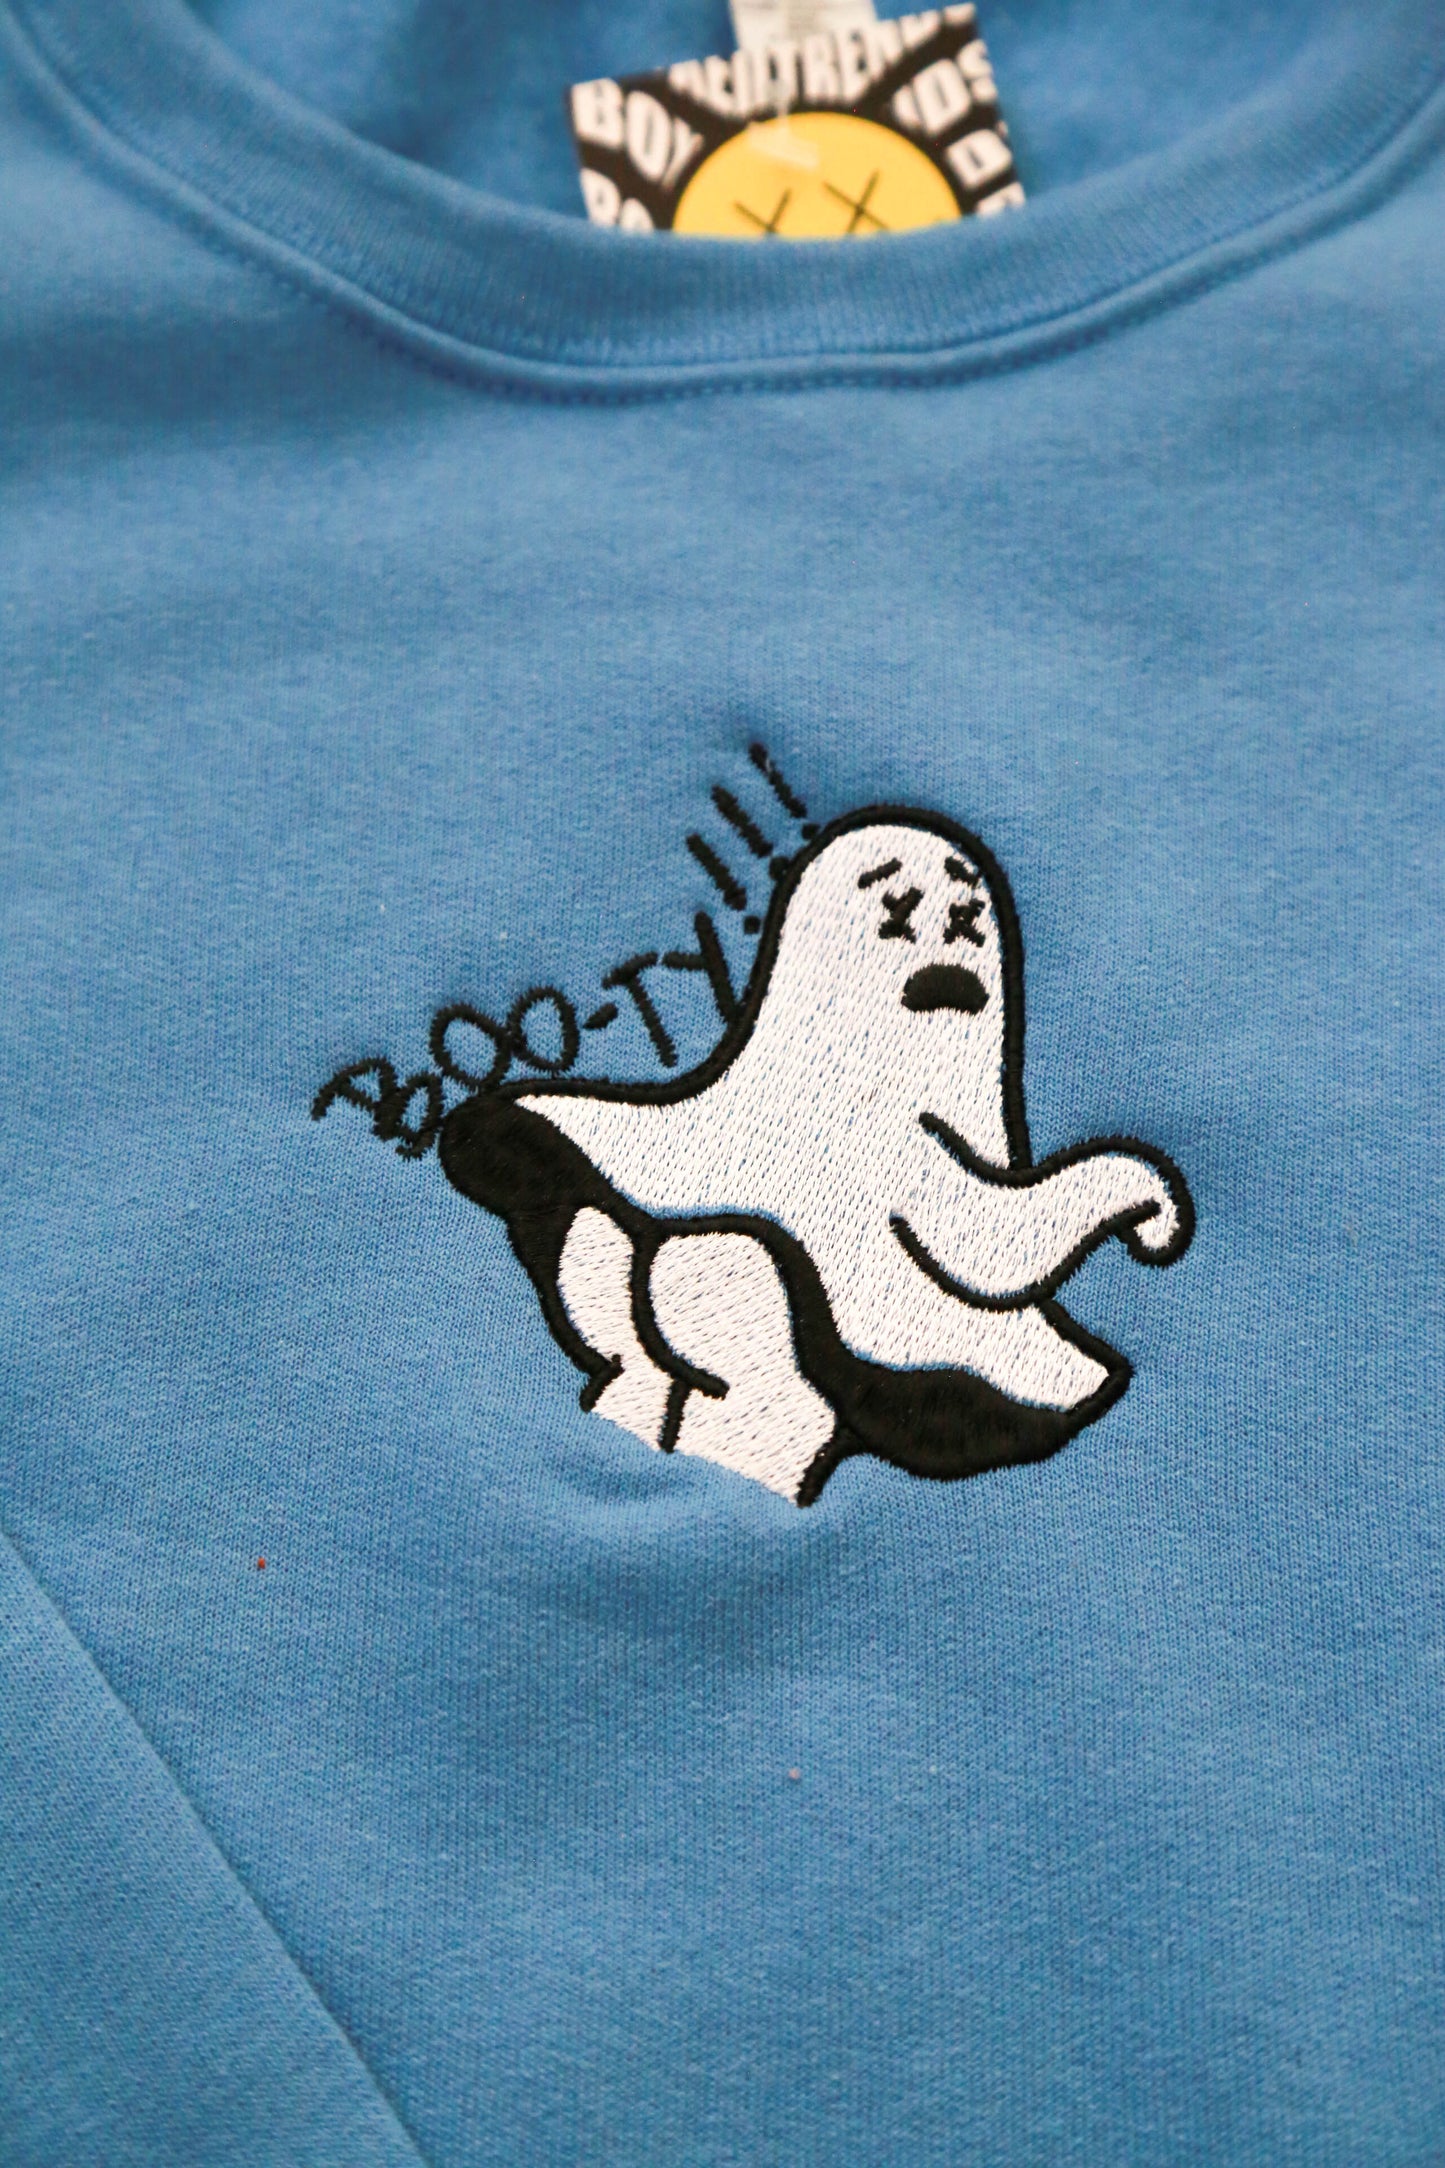 BOO-Ty Ghost Butt Embroidery